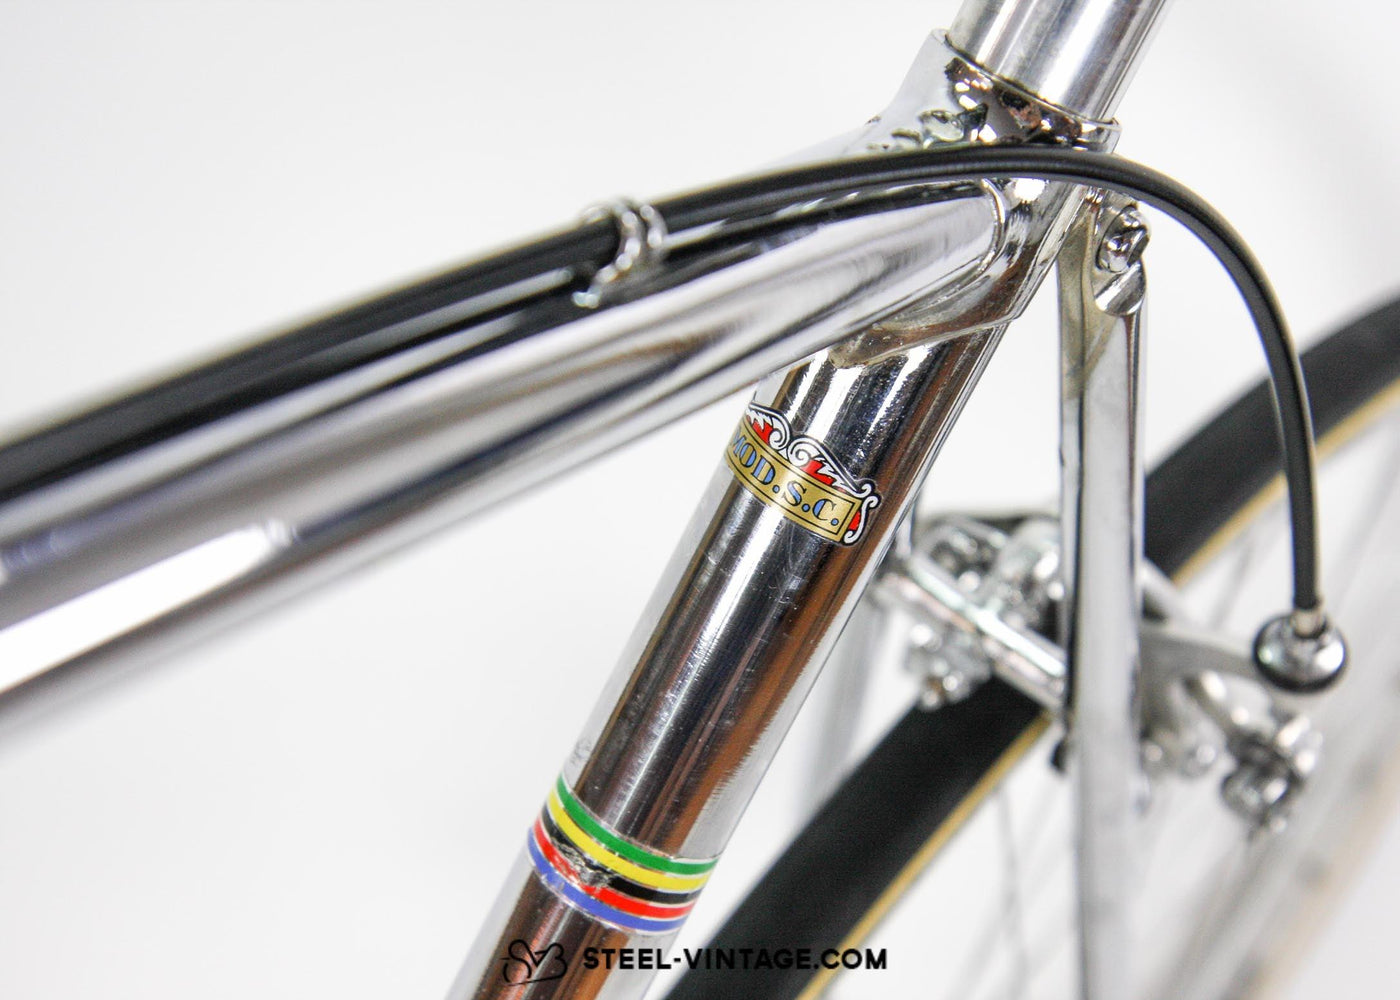 Cinelli Supercorsa Legerissimo chromed 1970s Classic Road Bicycle - Steel Vintage Bikes